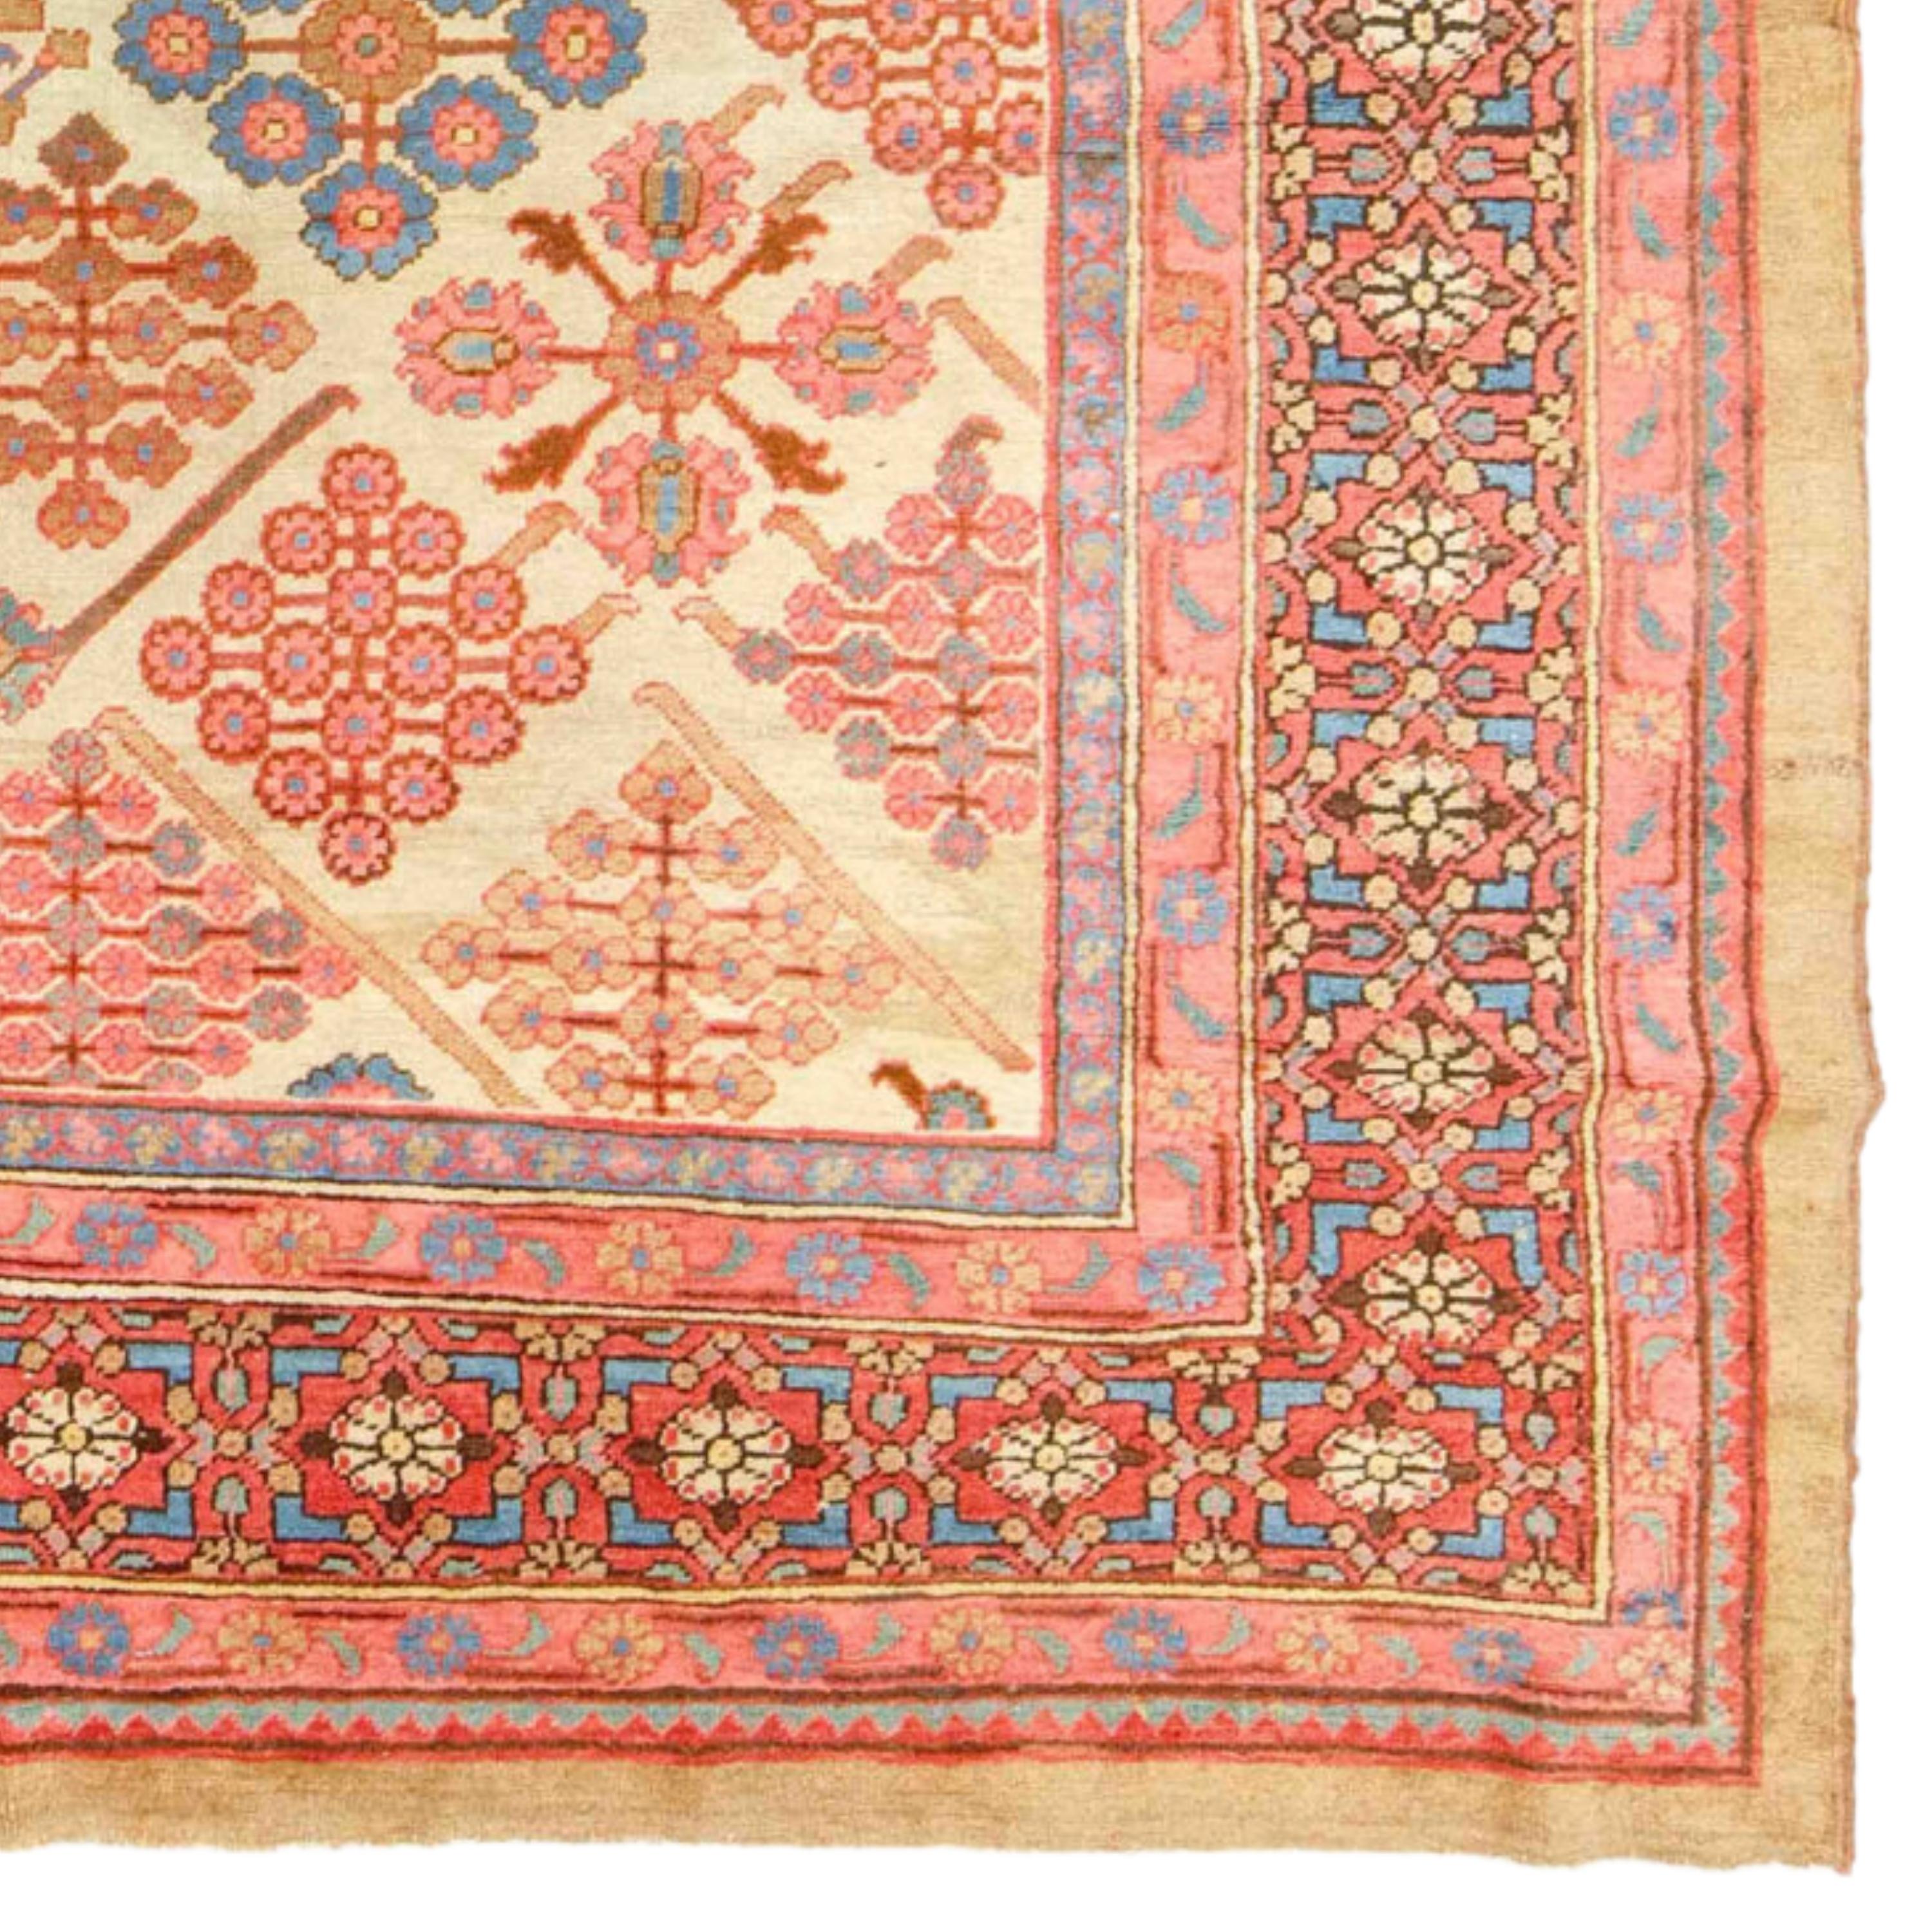 Wool Antique Bakshaish Rug - Late of the 19th Century Bakshaish Rug, Antique Rug For Sale